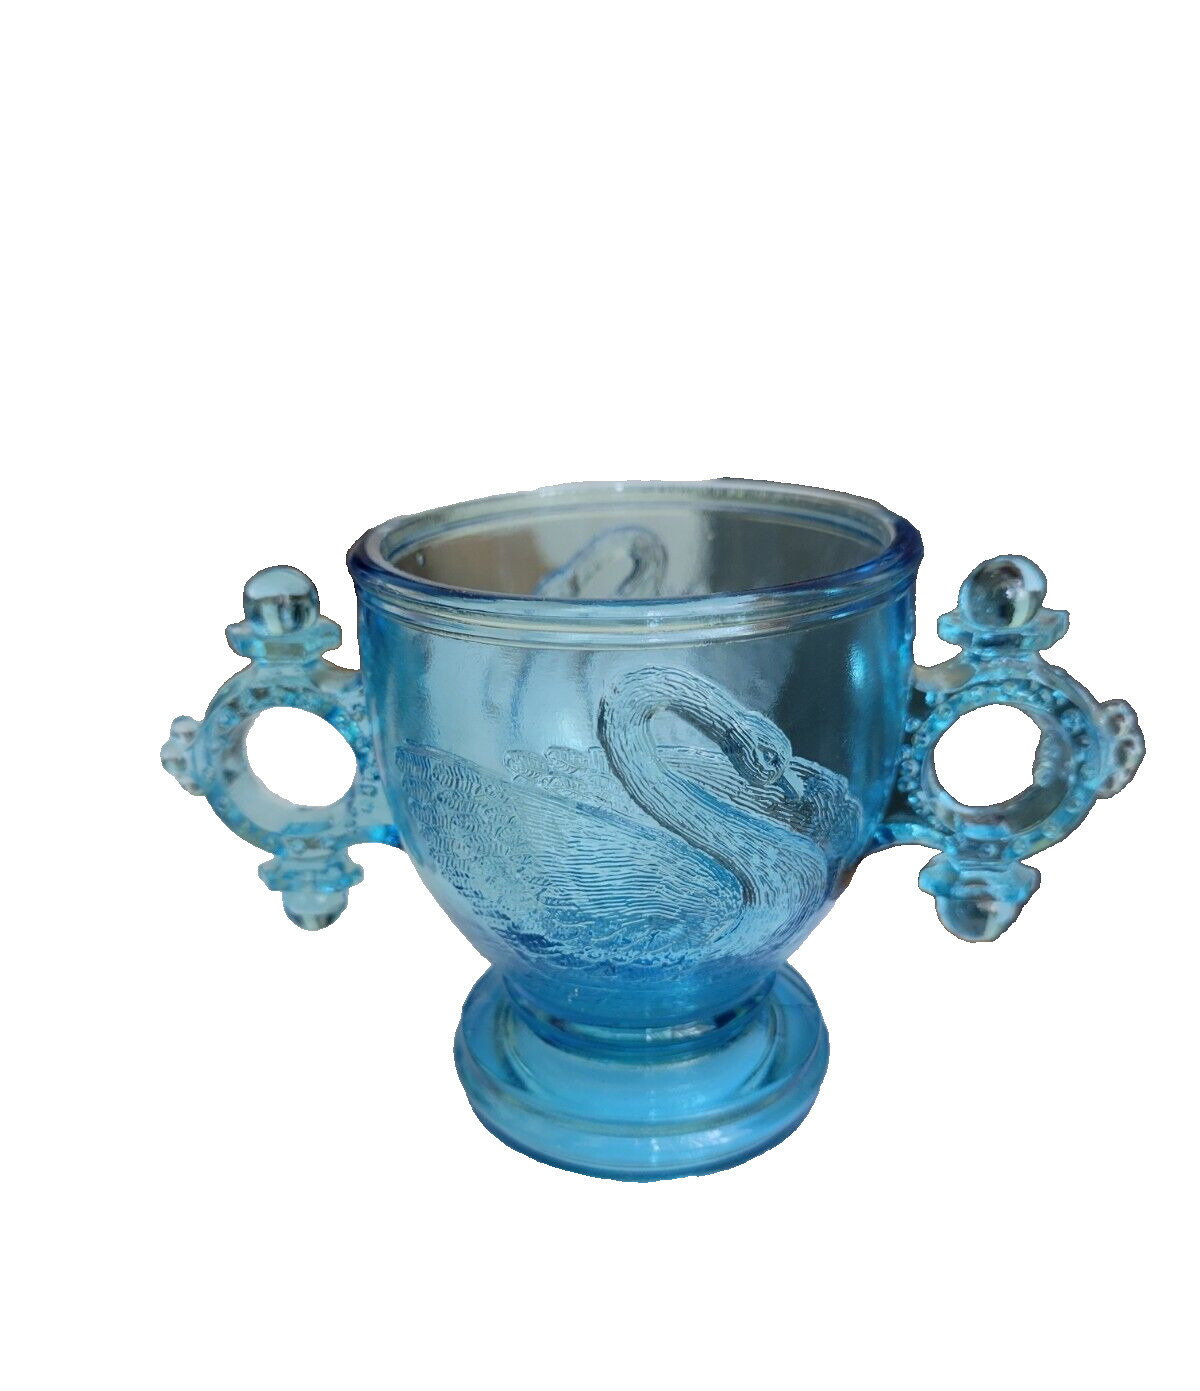 1880s Atterbury Blue Glass Swan Sugar Bowl with Ring Handles Antique